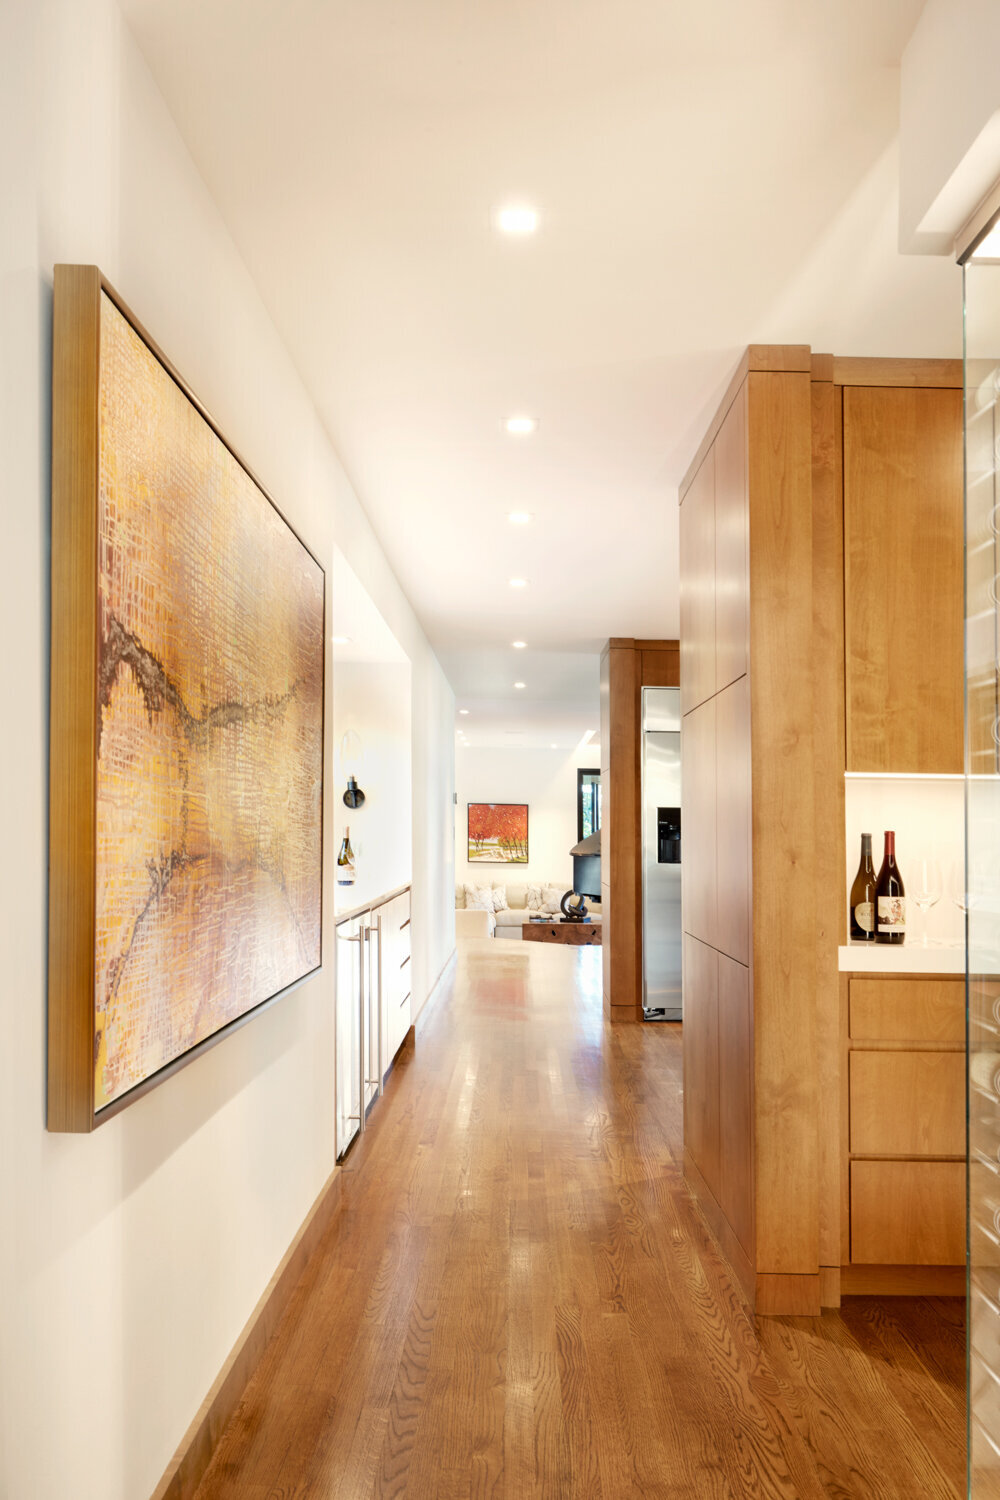 Panageries Residential Interior Design | Pacific NW Modern Dwelling Hallway with clear views of each part of the home